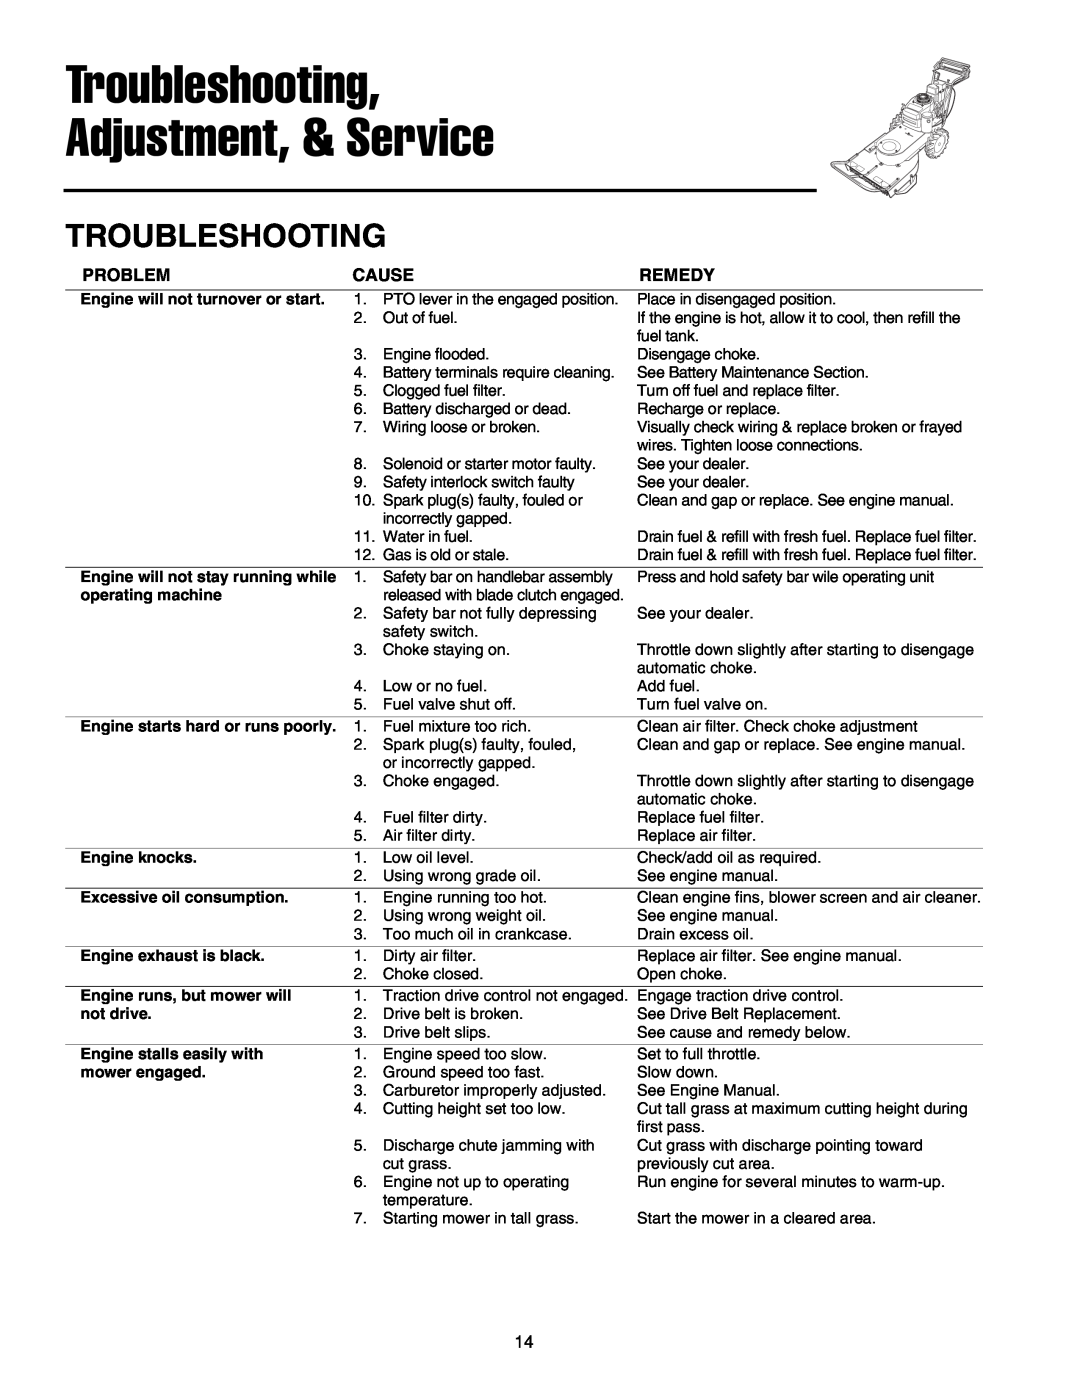 Briggs & Stratton FB13250BS manual Troubleshooting Adjustment, & Service 